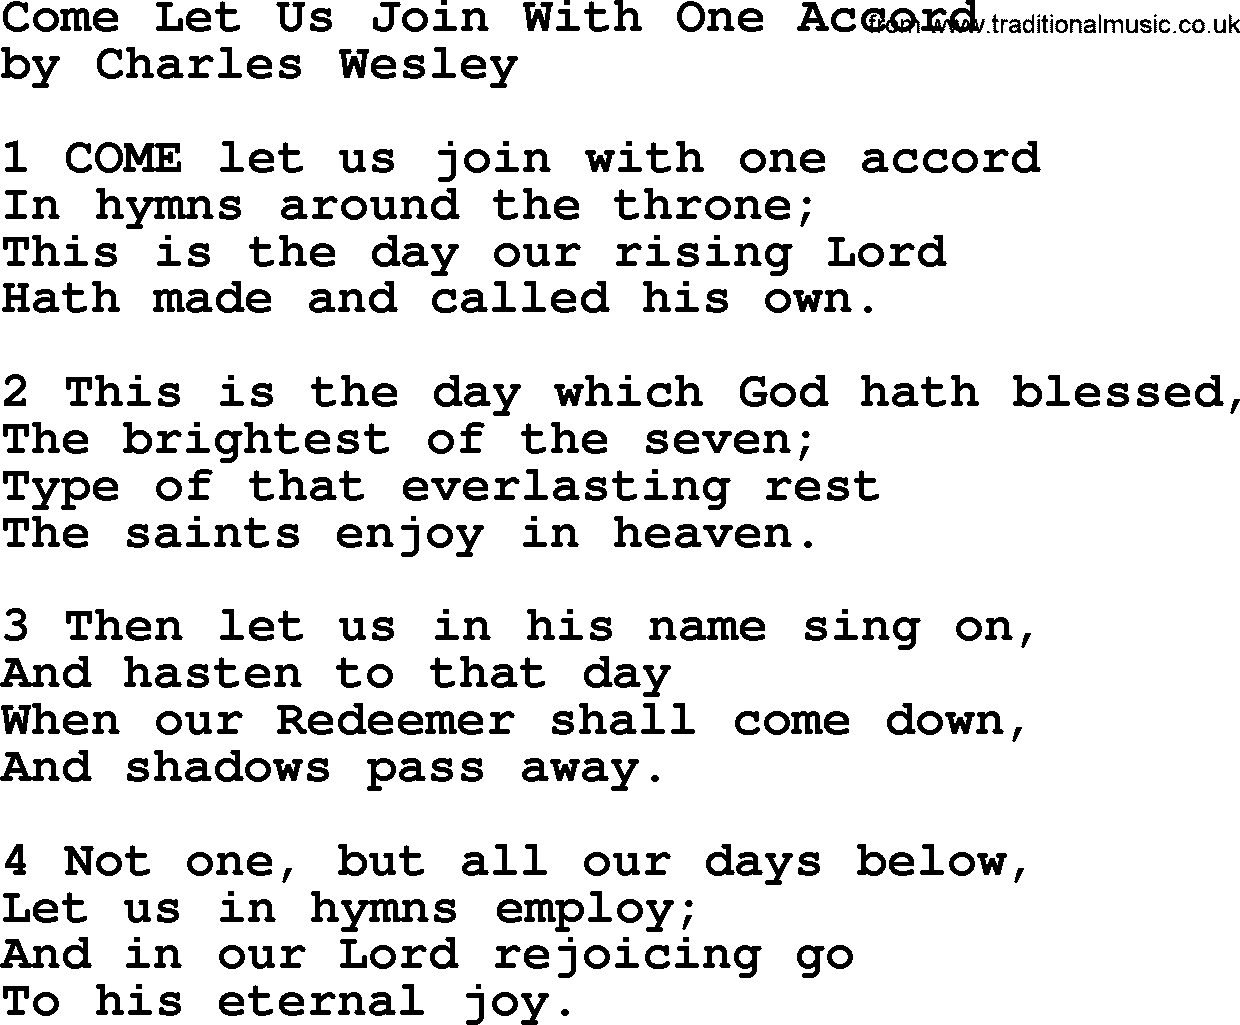 Charles Wesley hymn: Come Let Us Join With One Accord, lyrics